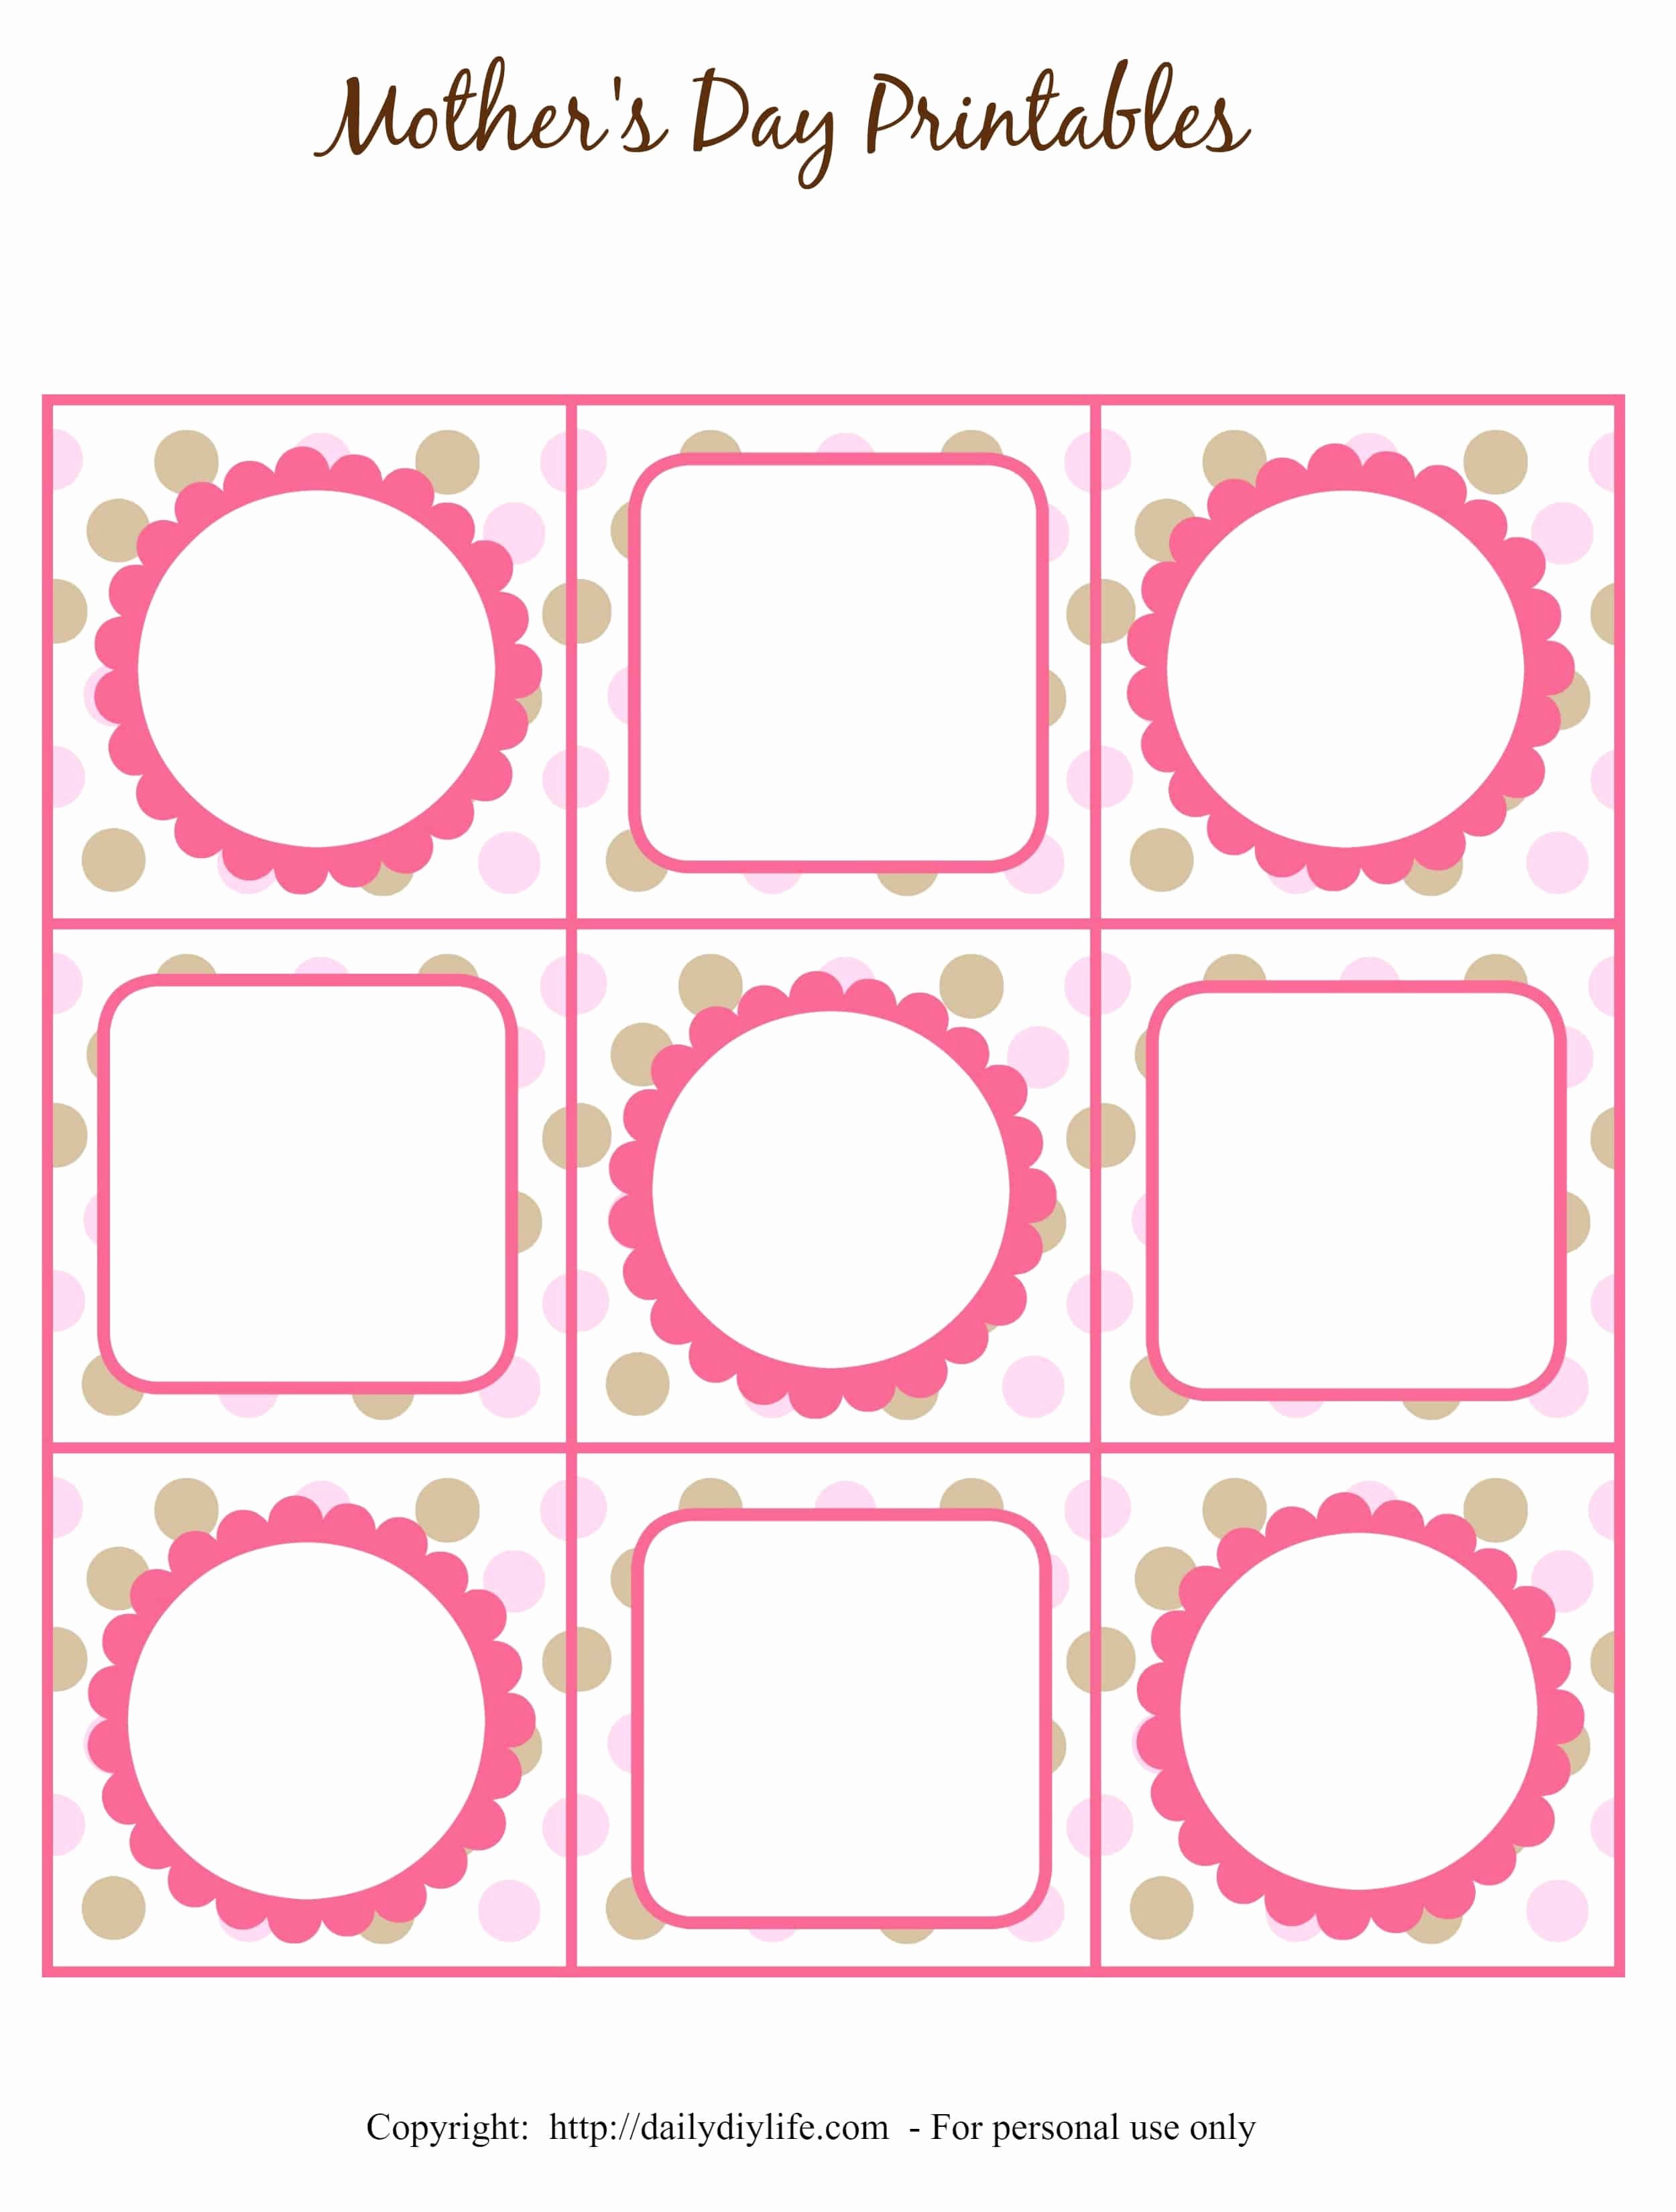 Free Printable Blank Gift Tags Awesome Mother S Day Free Printable Gift Tags or Cupcake toppers